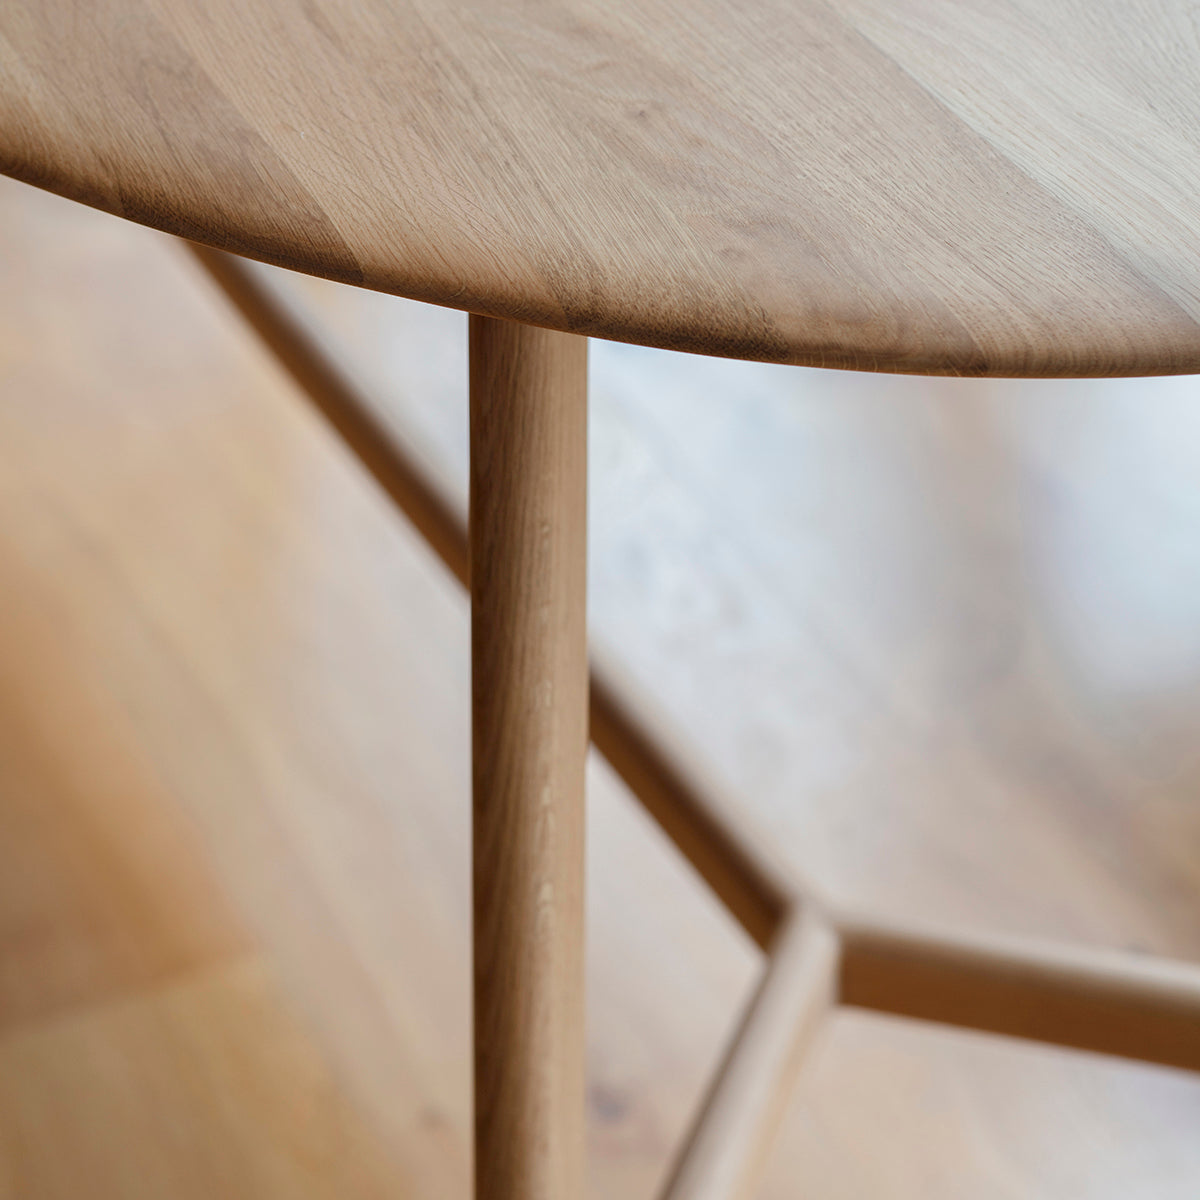 A close up of a 1800x1000x760mm Dairy Oval Dining Table by Kikiathome.co.uk on a wooden floor, perfect for interior decor.